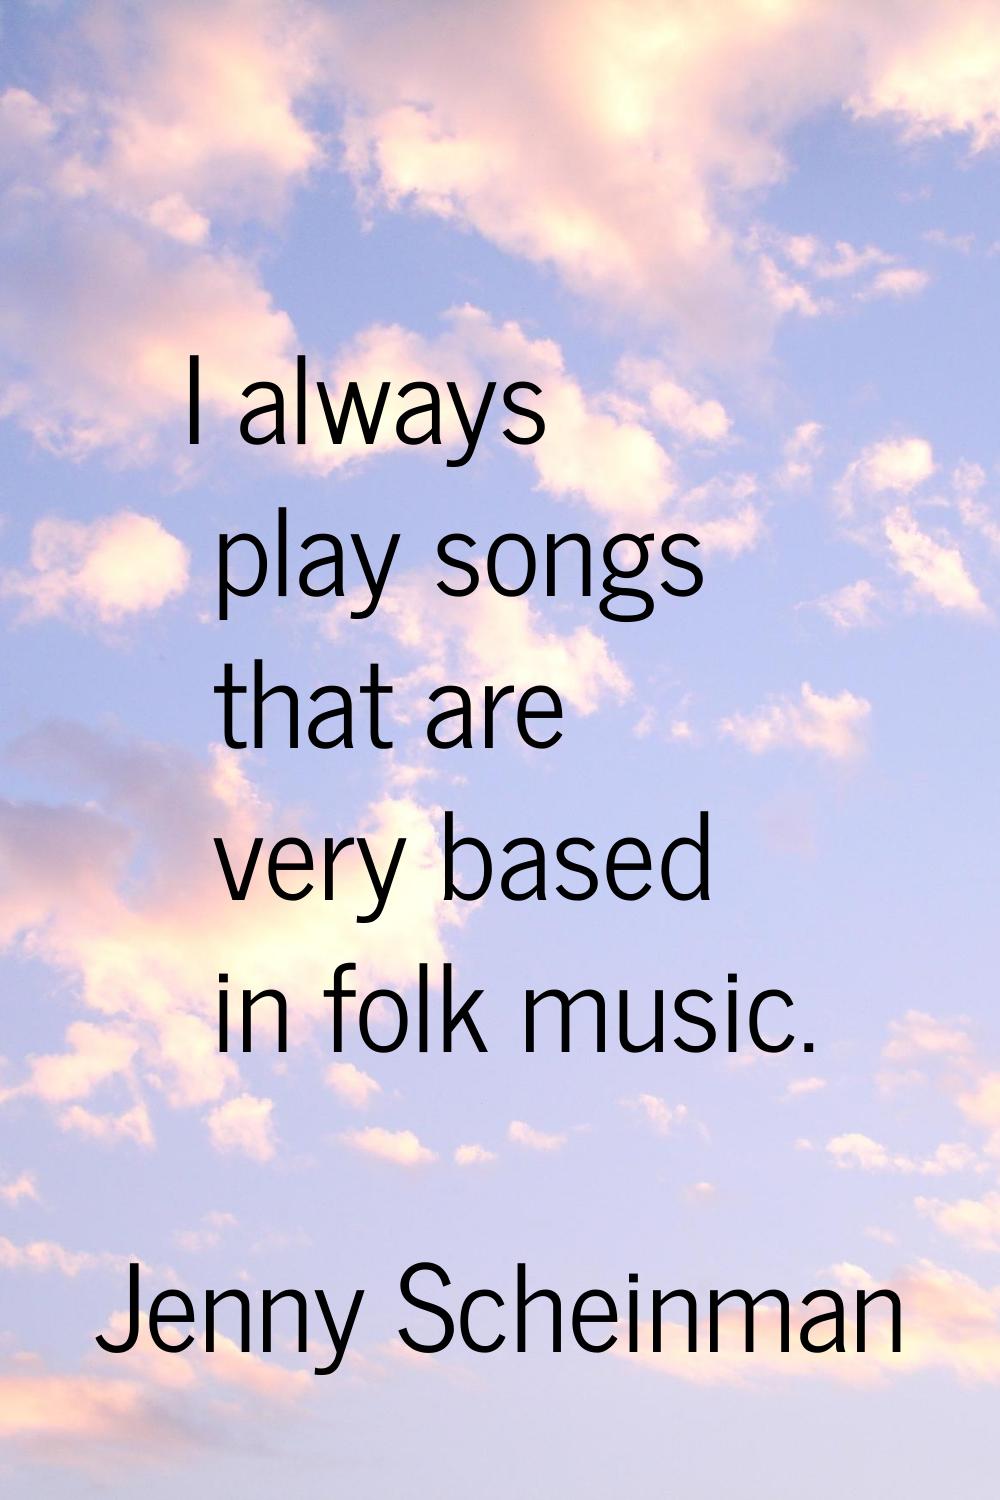 I always play songs that are very based in folk music.